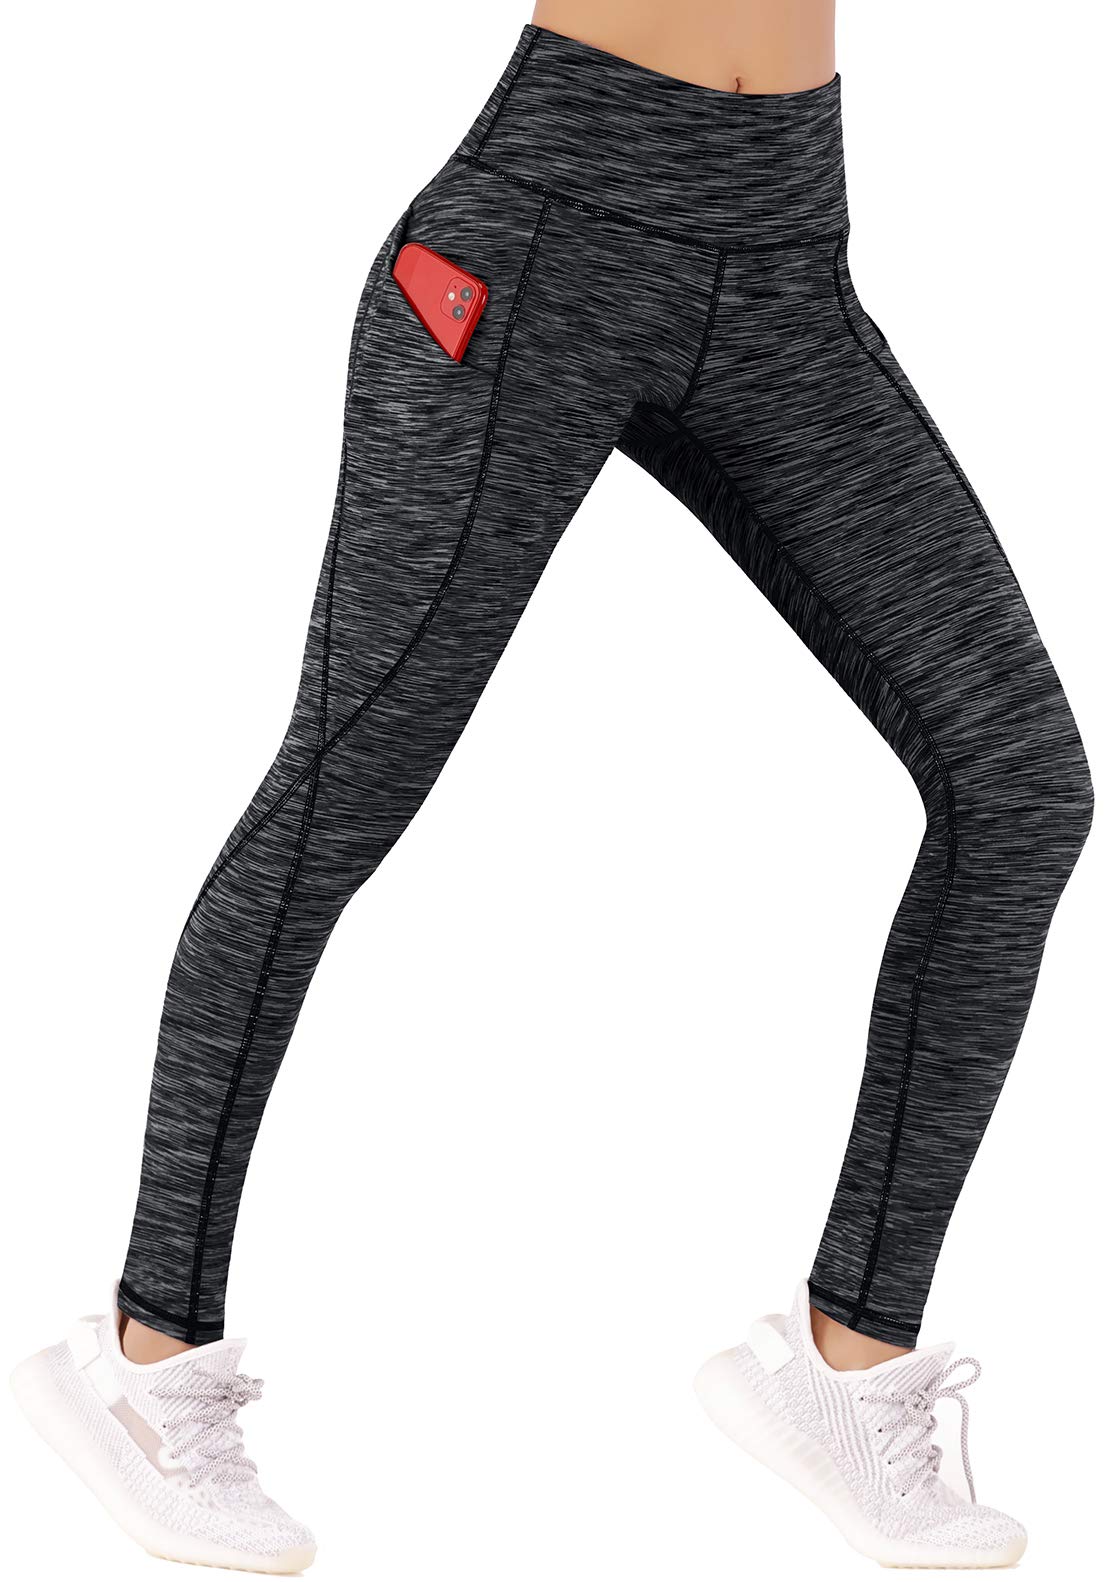 Women's Thermal Fleece Leggings Mid Rise Sport Pants with Pockets